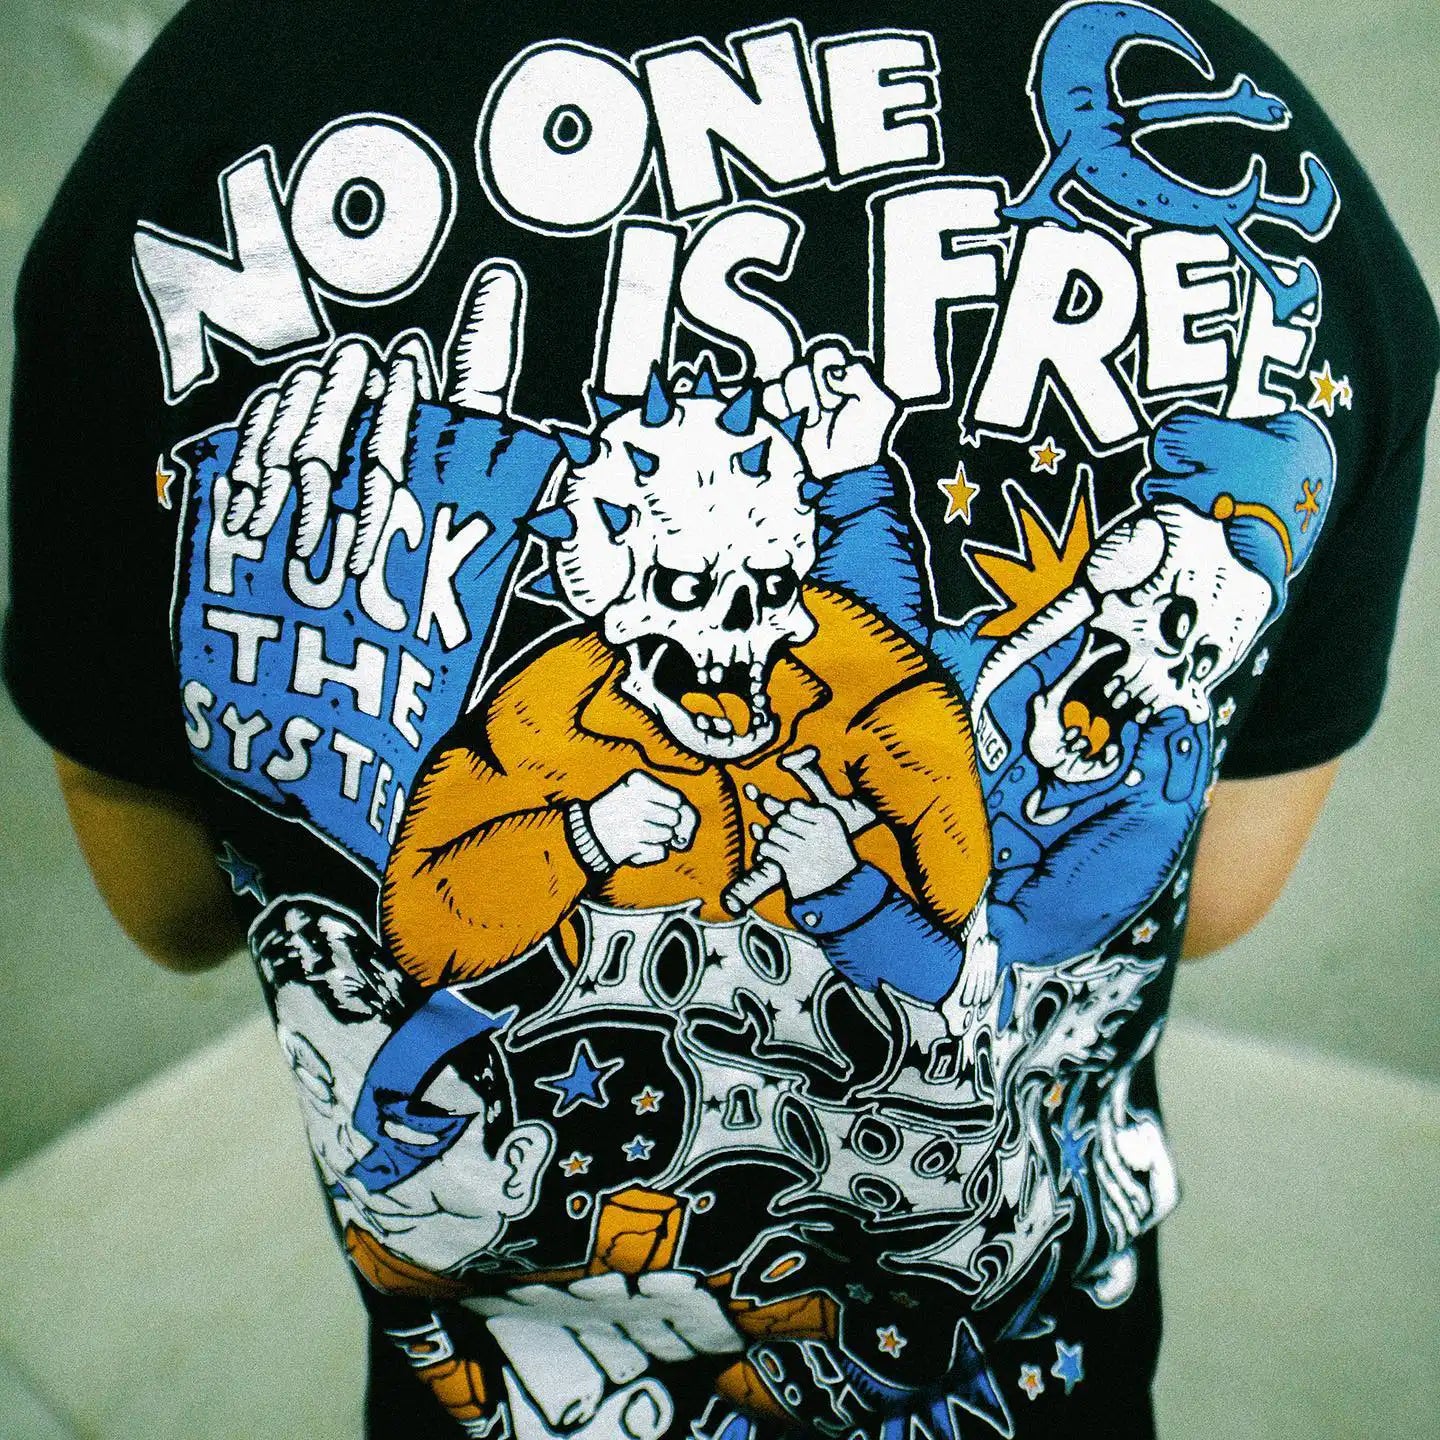 No one is free T-shirt